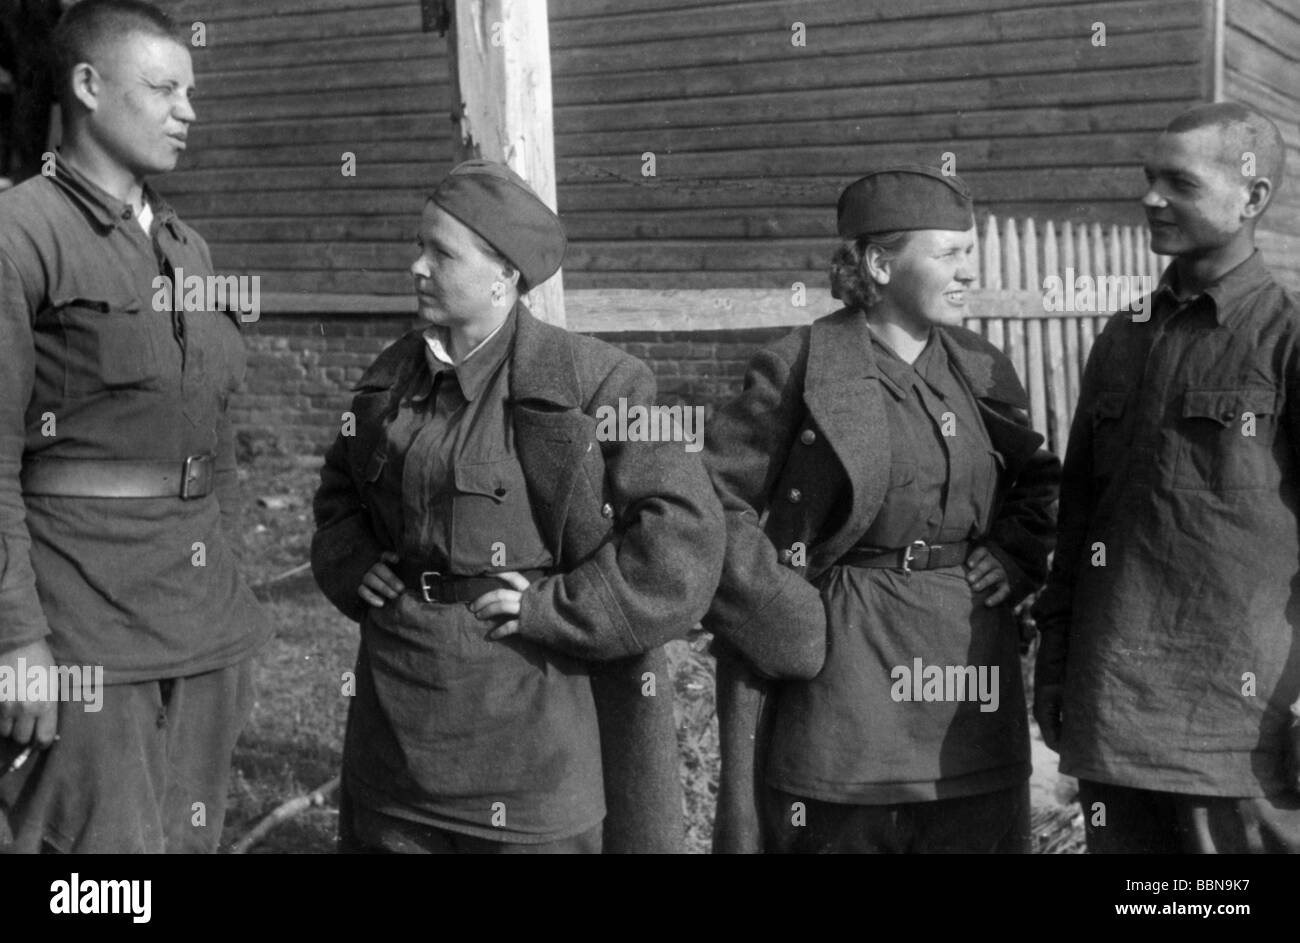 events, Second World War / WWII, Russia, prisoners of war, soldiers of the Red Army, captured at Dukhovshchina near Smolensk, July 1941, Stock Photo